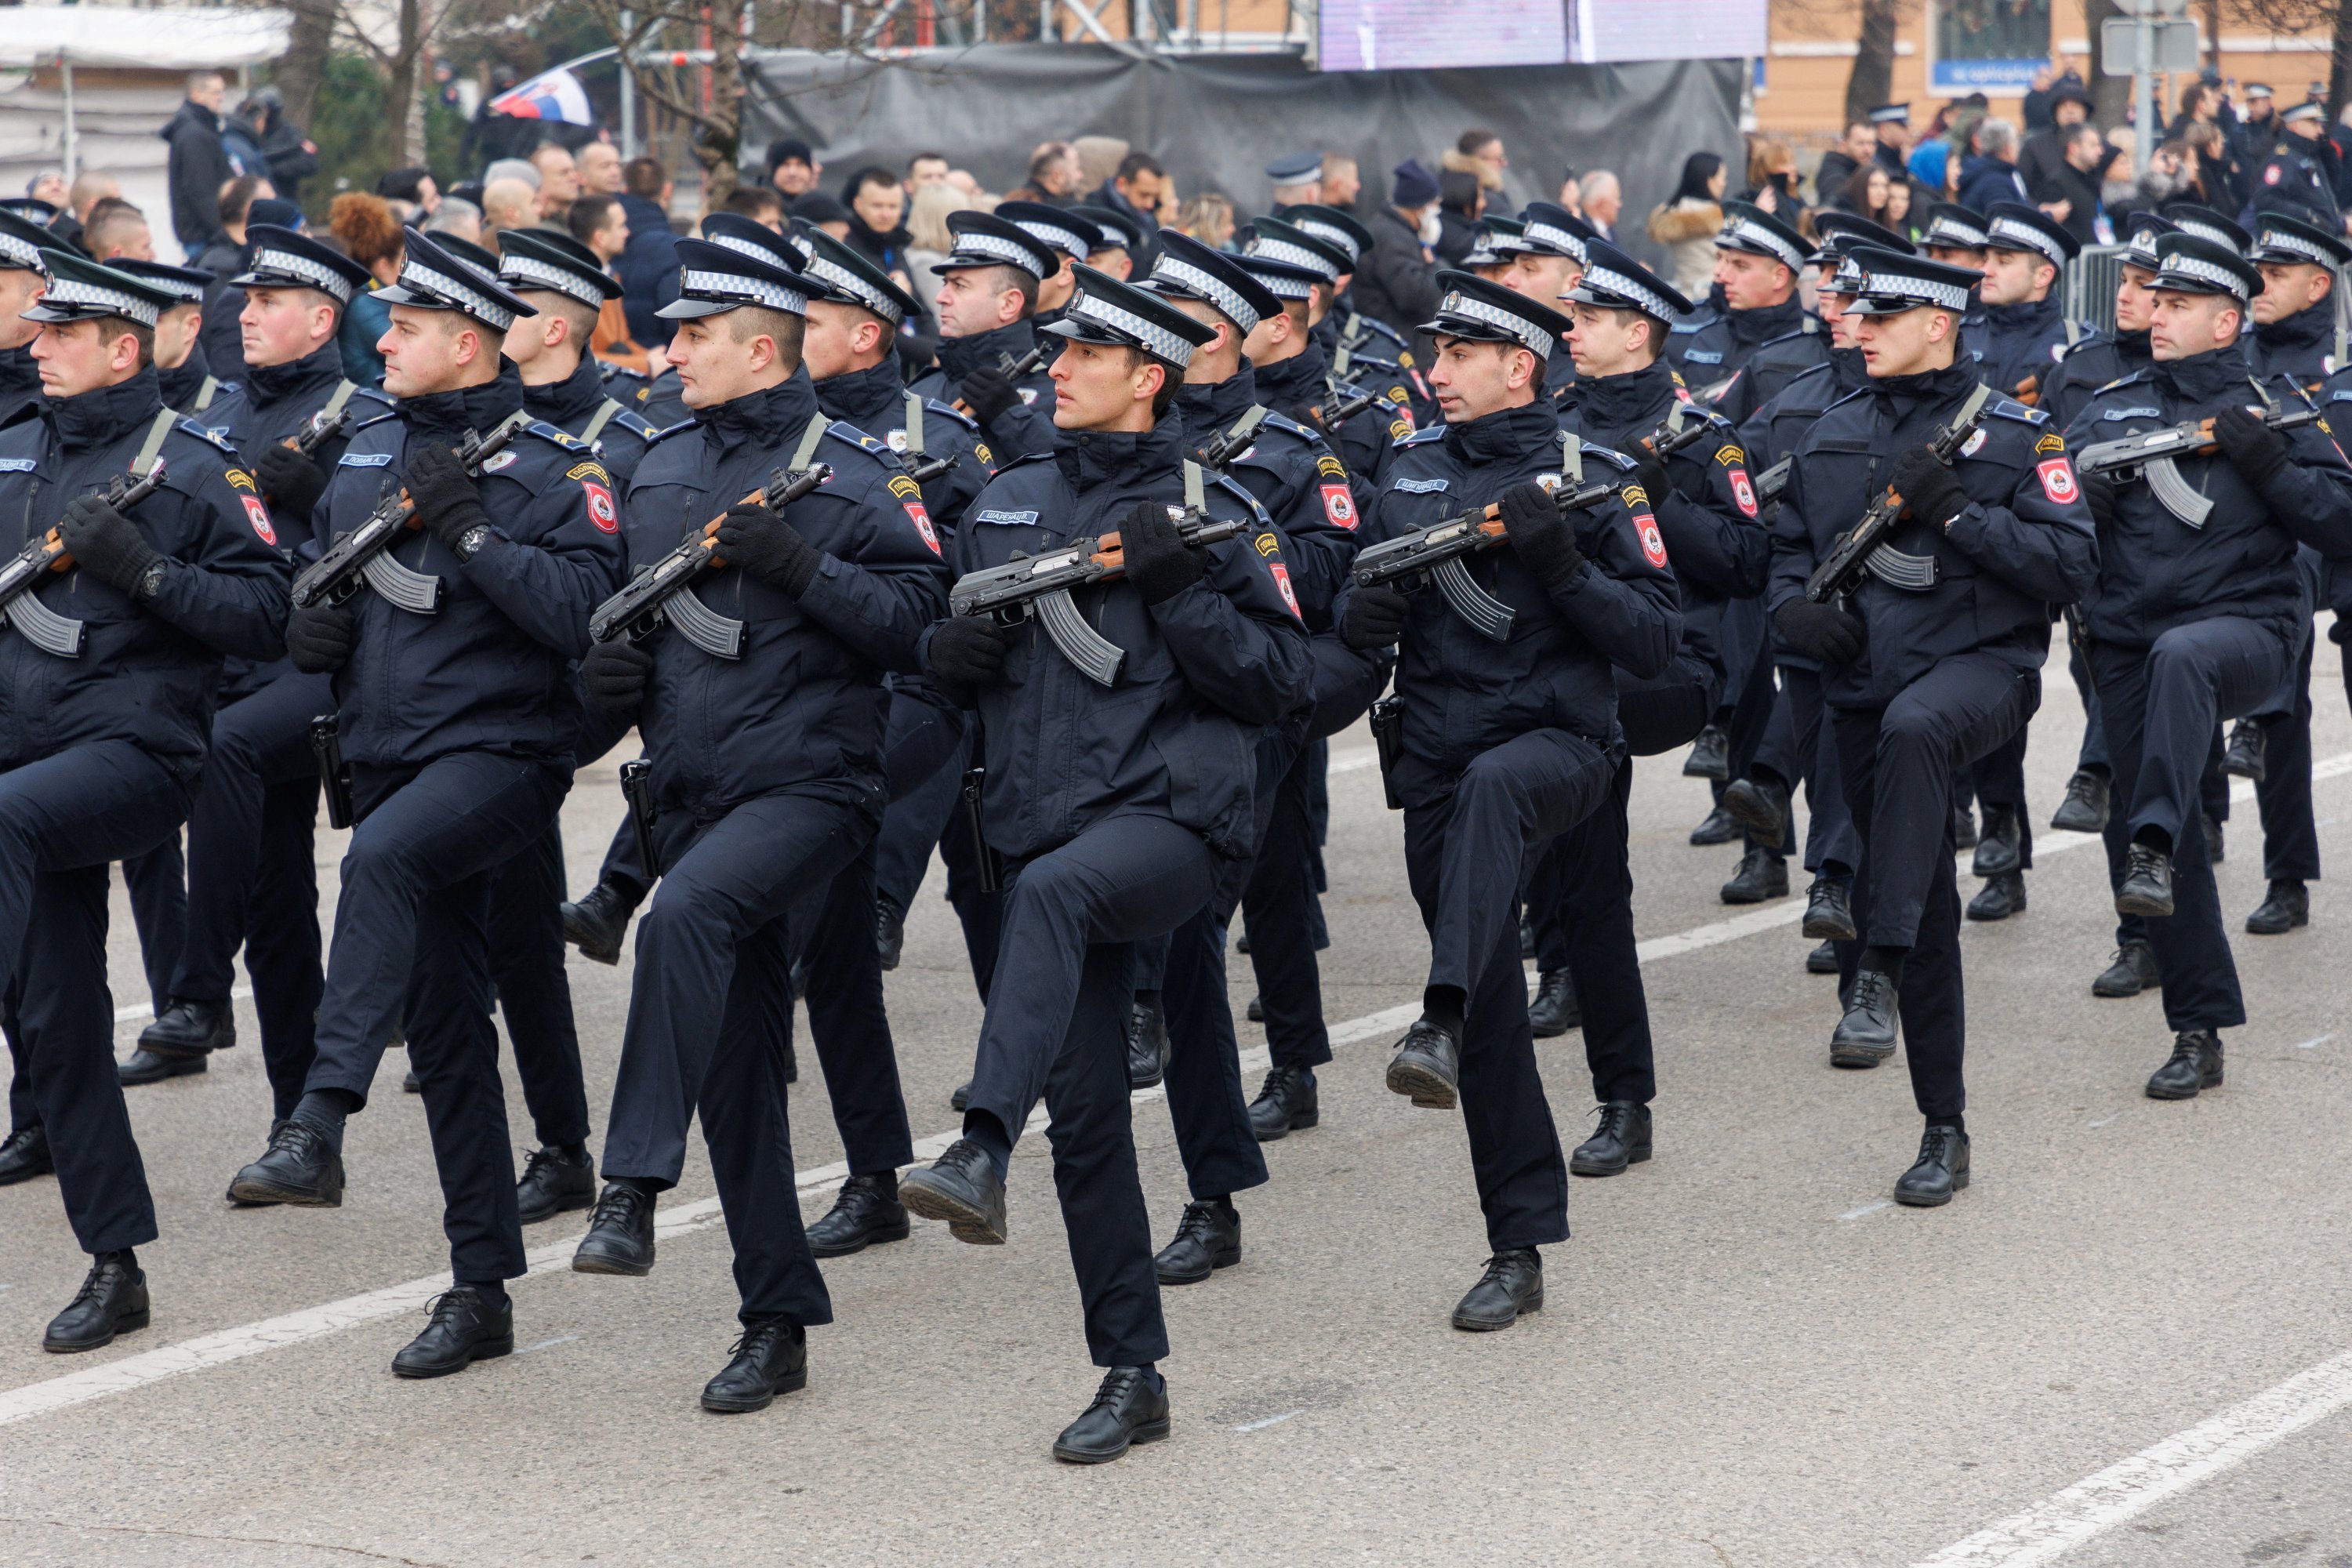 Police march during parade celebrations to mark their autonomous Serb Republic's banned national holiday in Banja Luka, Bosnia-Herzegovina, Jan. 9, 2022. (Reuters Photo)